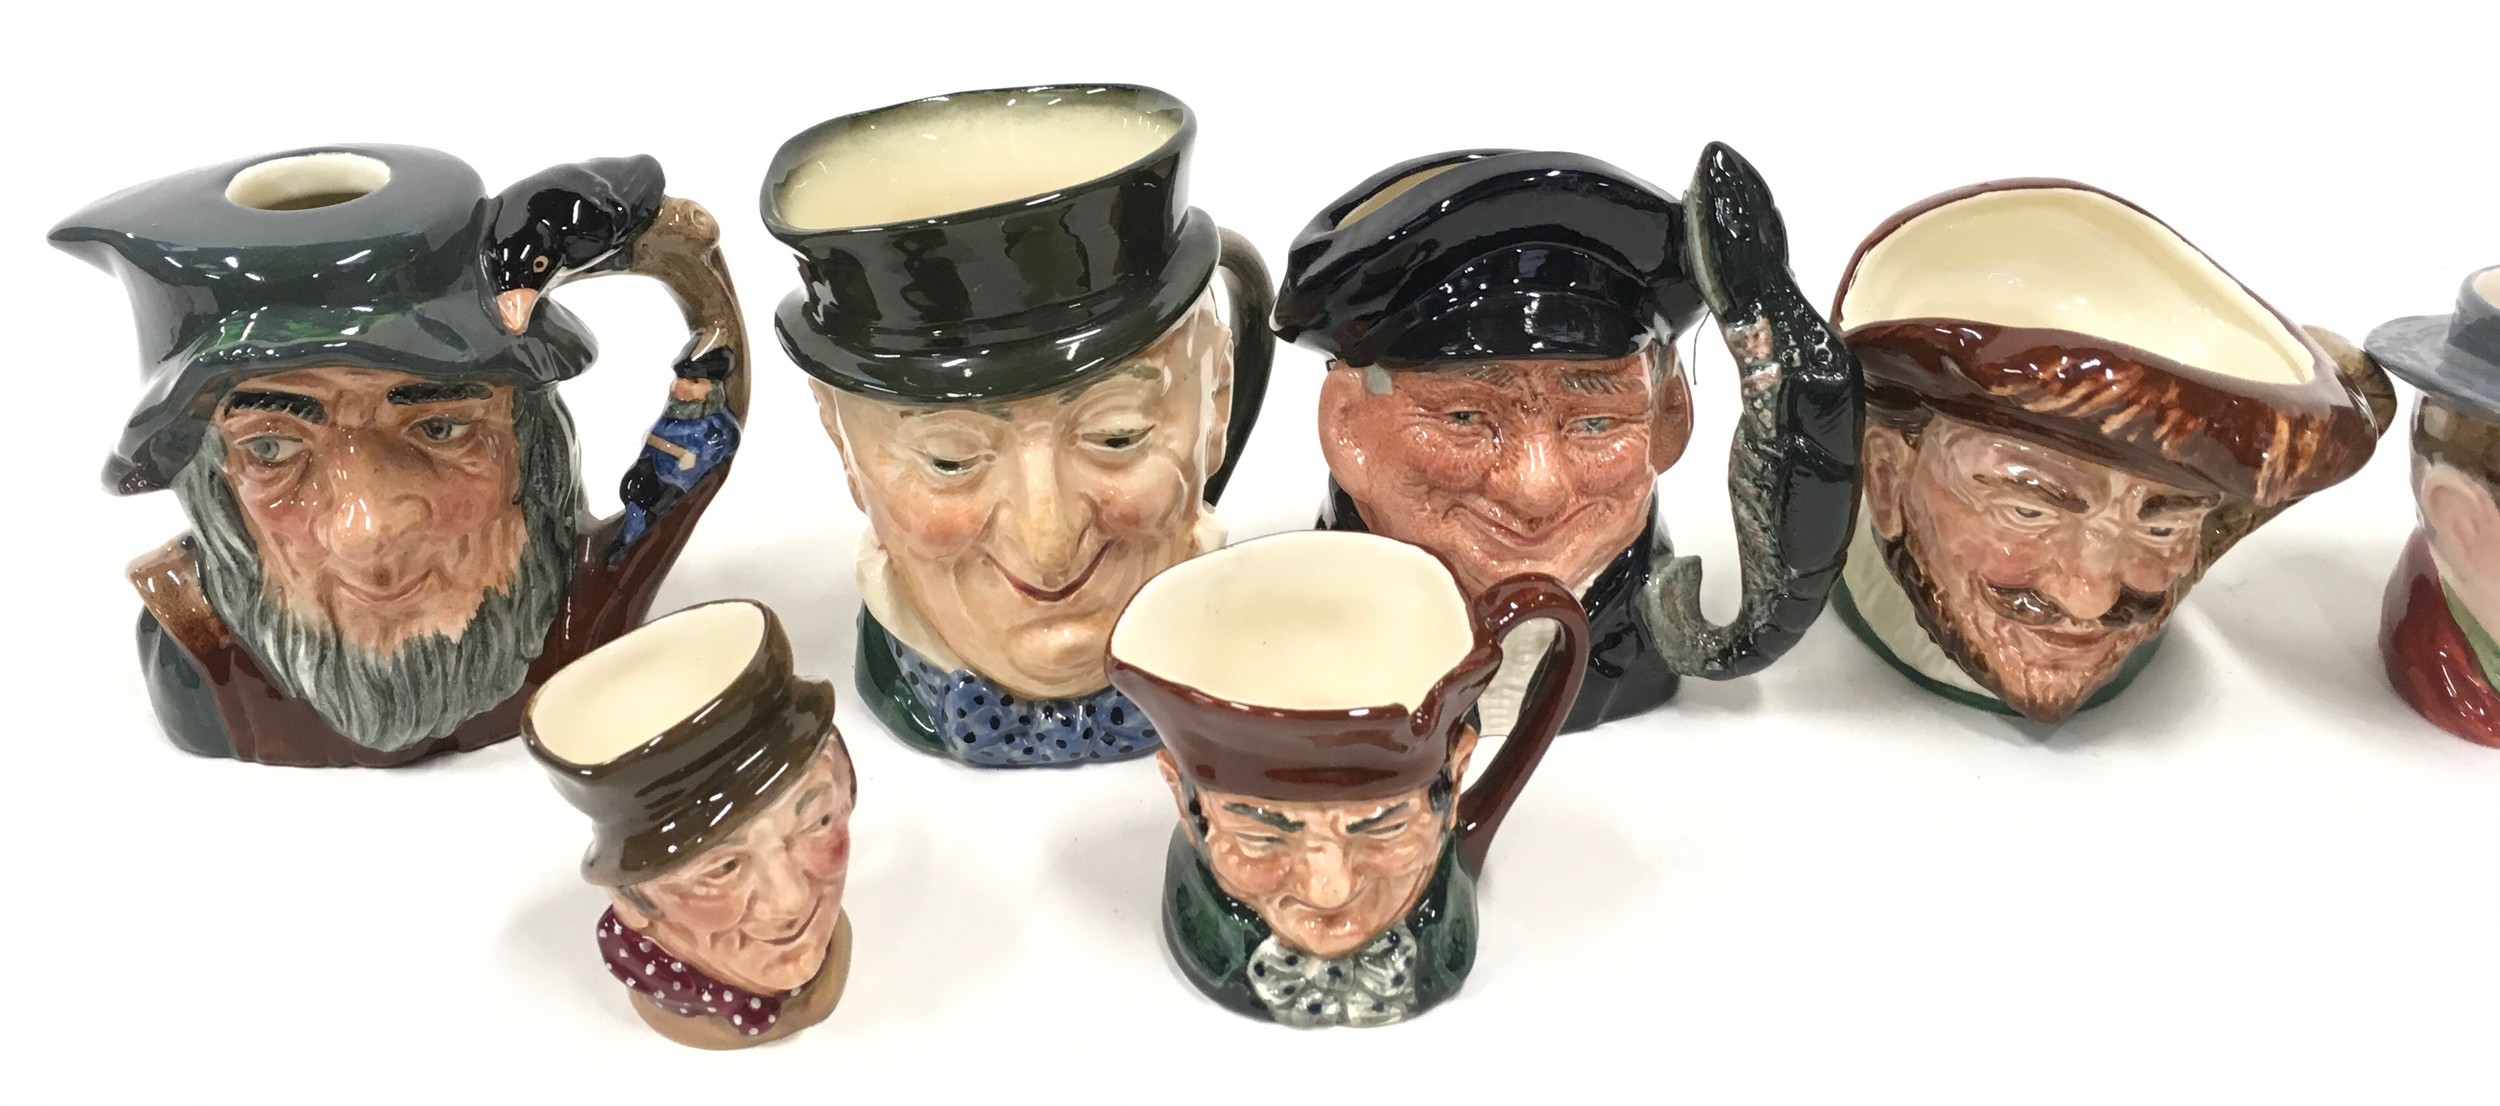 Eleven toby character jugs with examples by Royal Doulton and Beswick. - Image 3 of 5